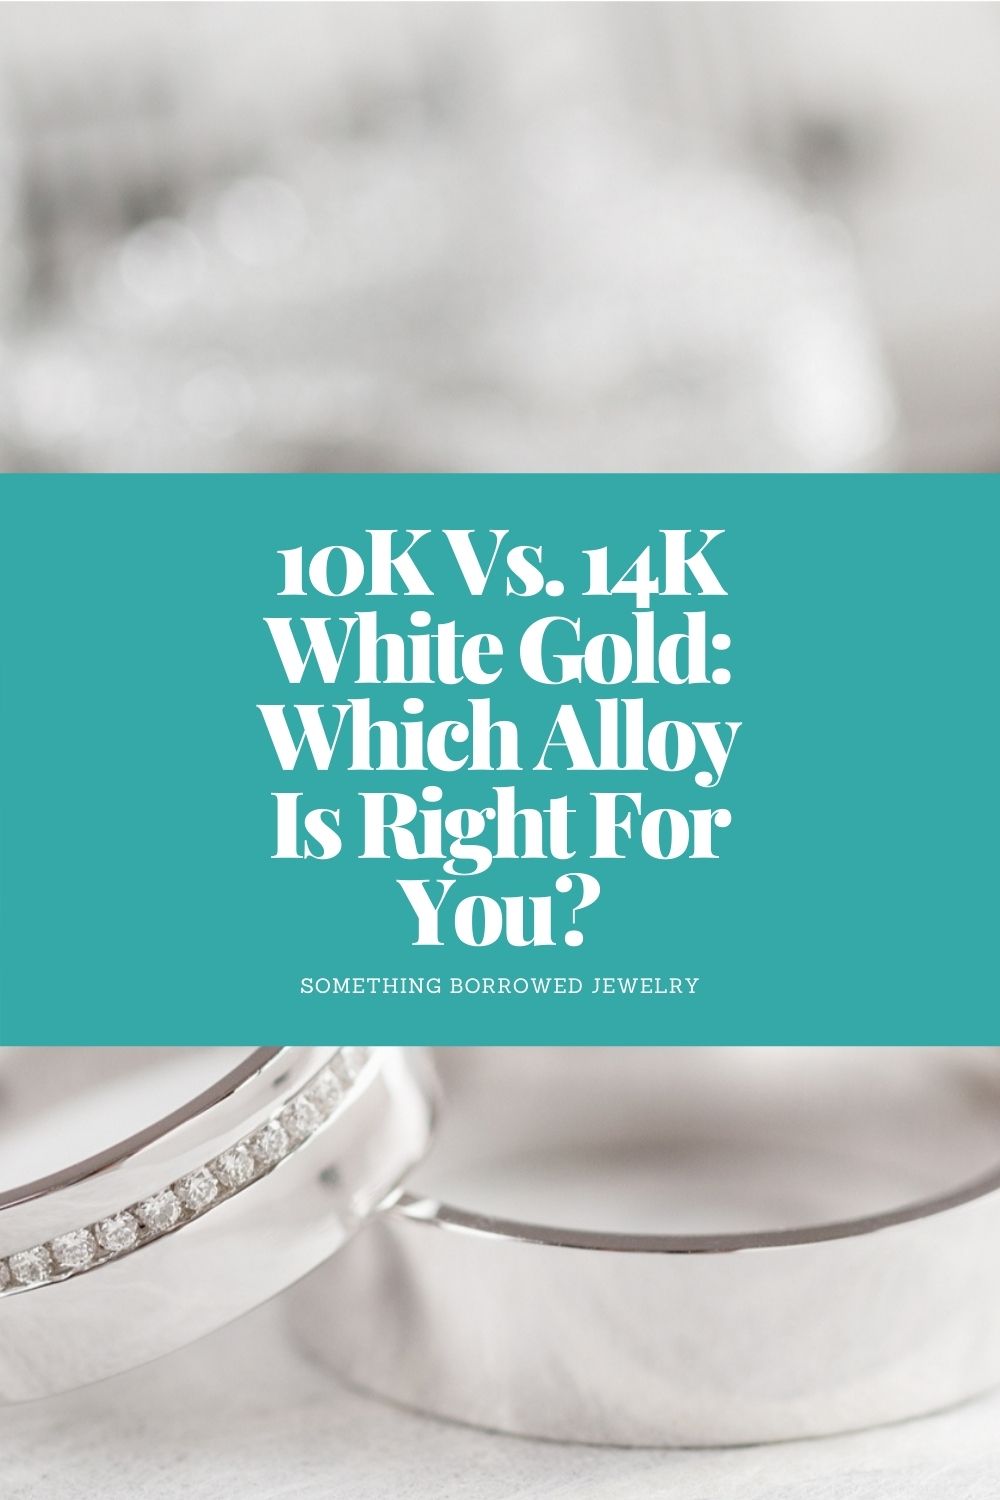 10K Vs. 14K White Gold Which Alloy Is Right For You pin 2